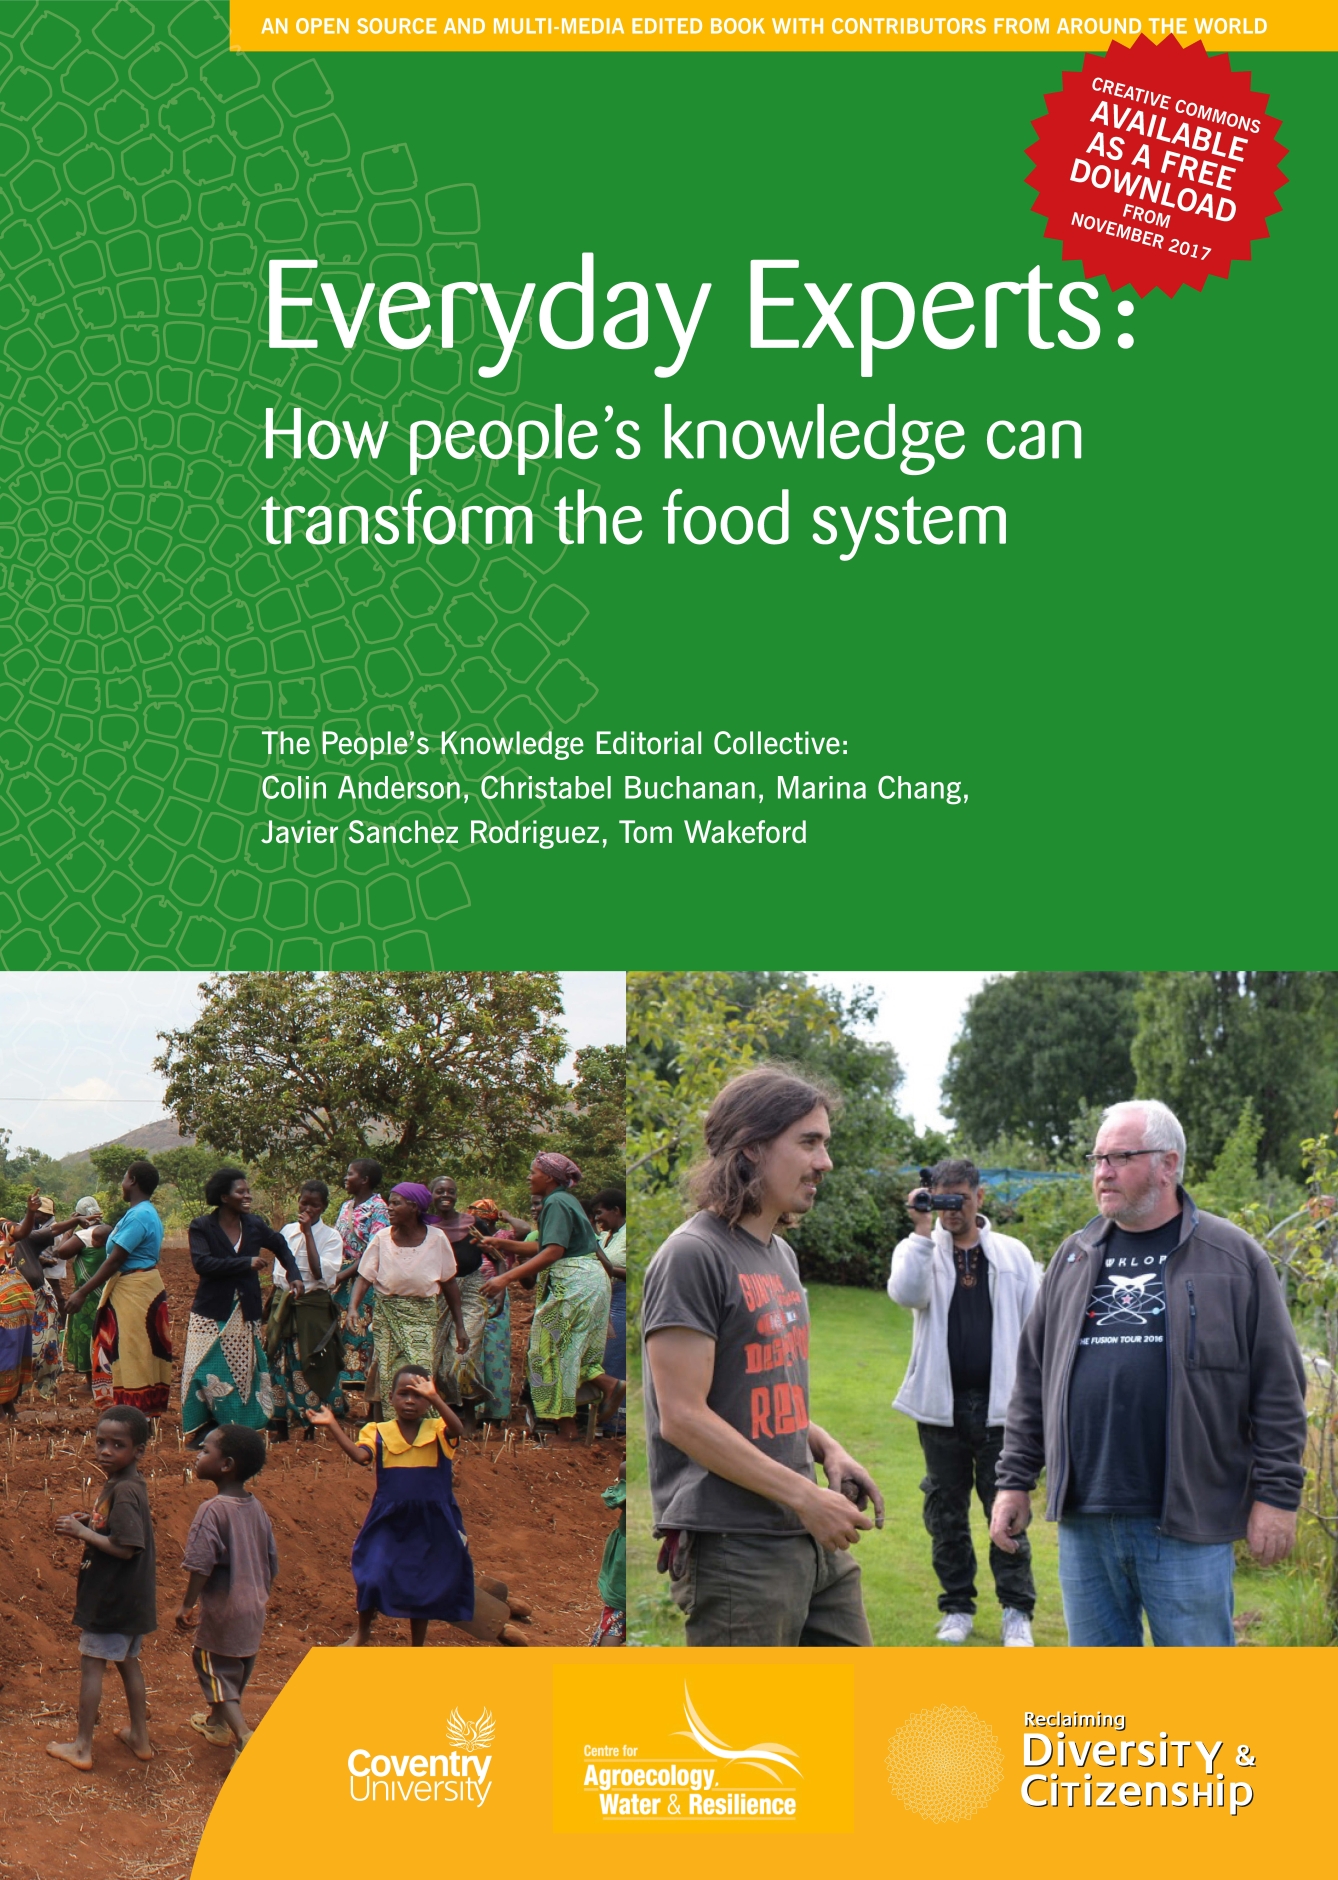 Cover page of the book "Everyday Experts: How people's knowledge can transform the food system.